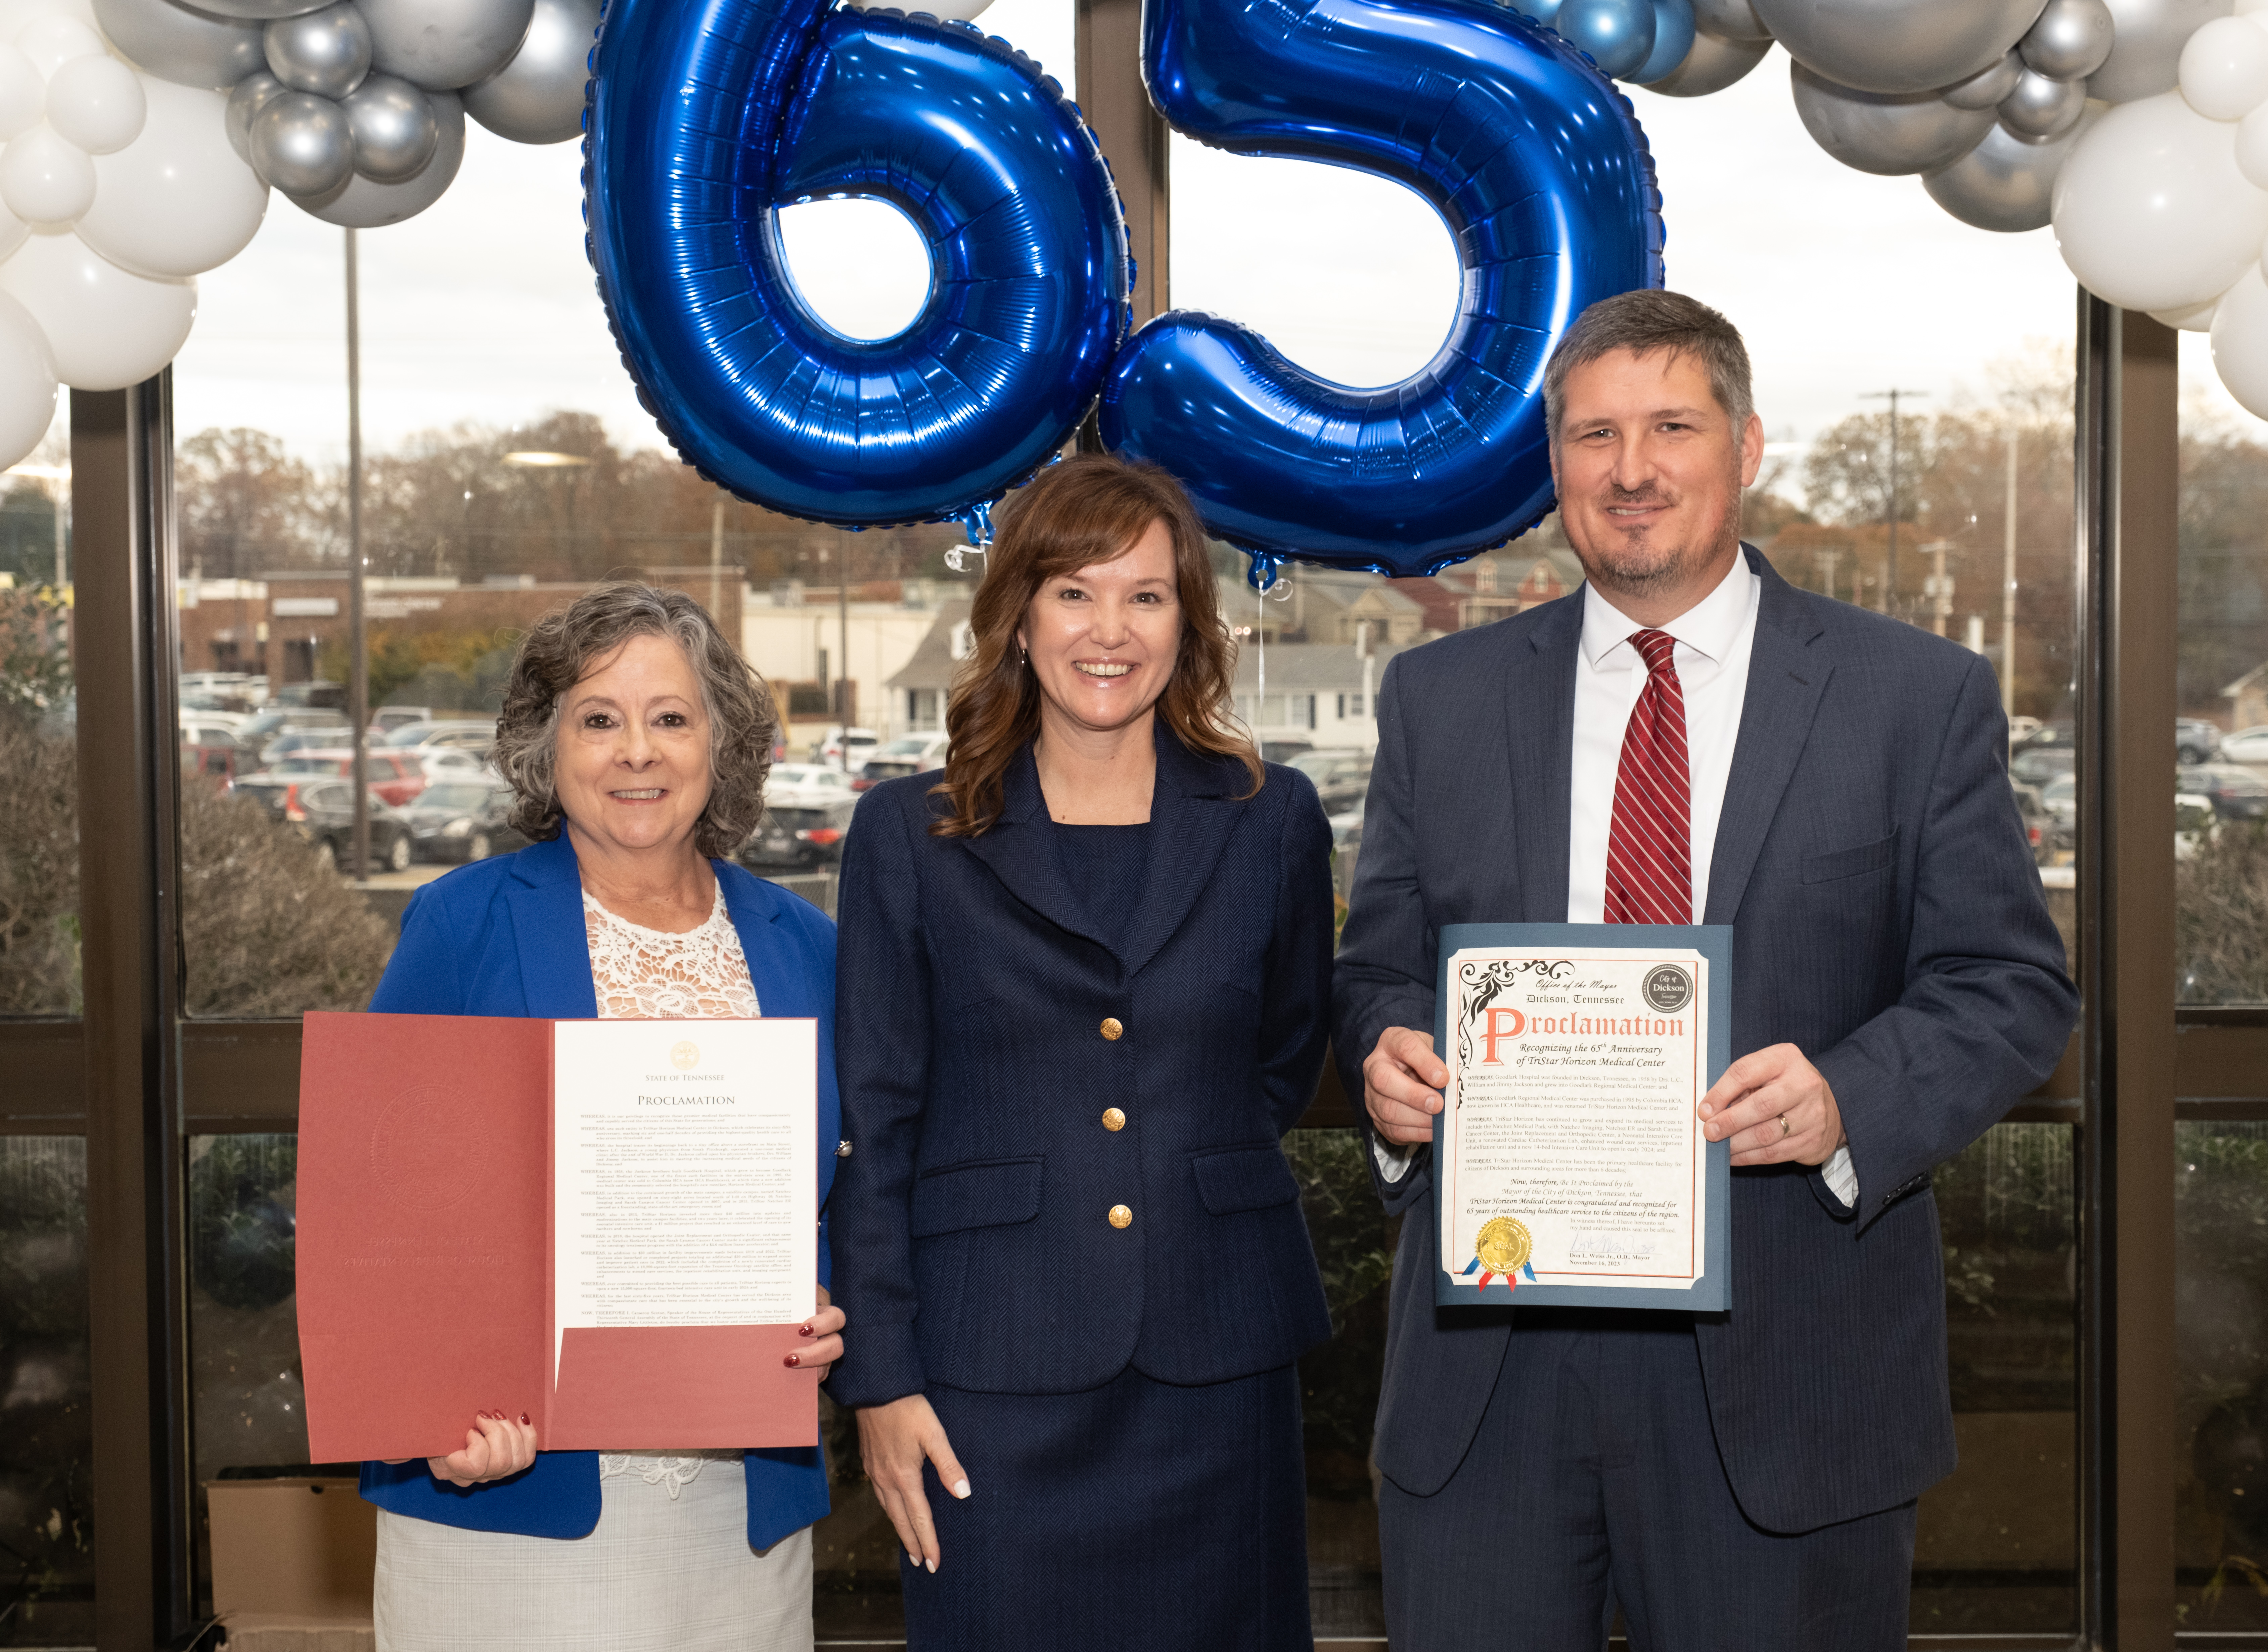 Mary Littleton (left) and Jason Epley (right) present hospital CEO, Cindy Bergmeier (center) with proclamation certificates